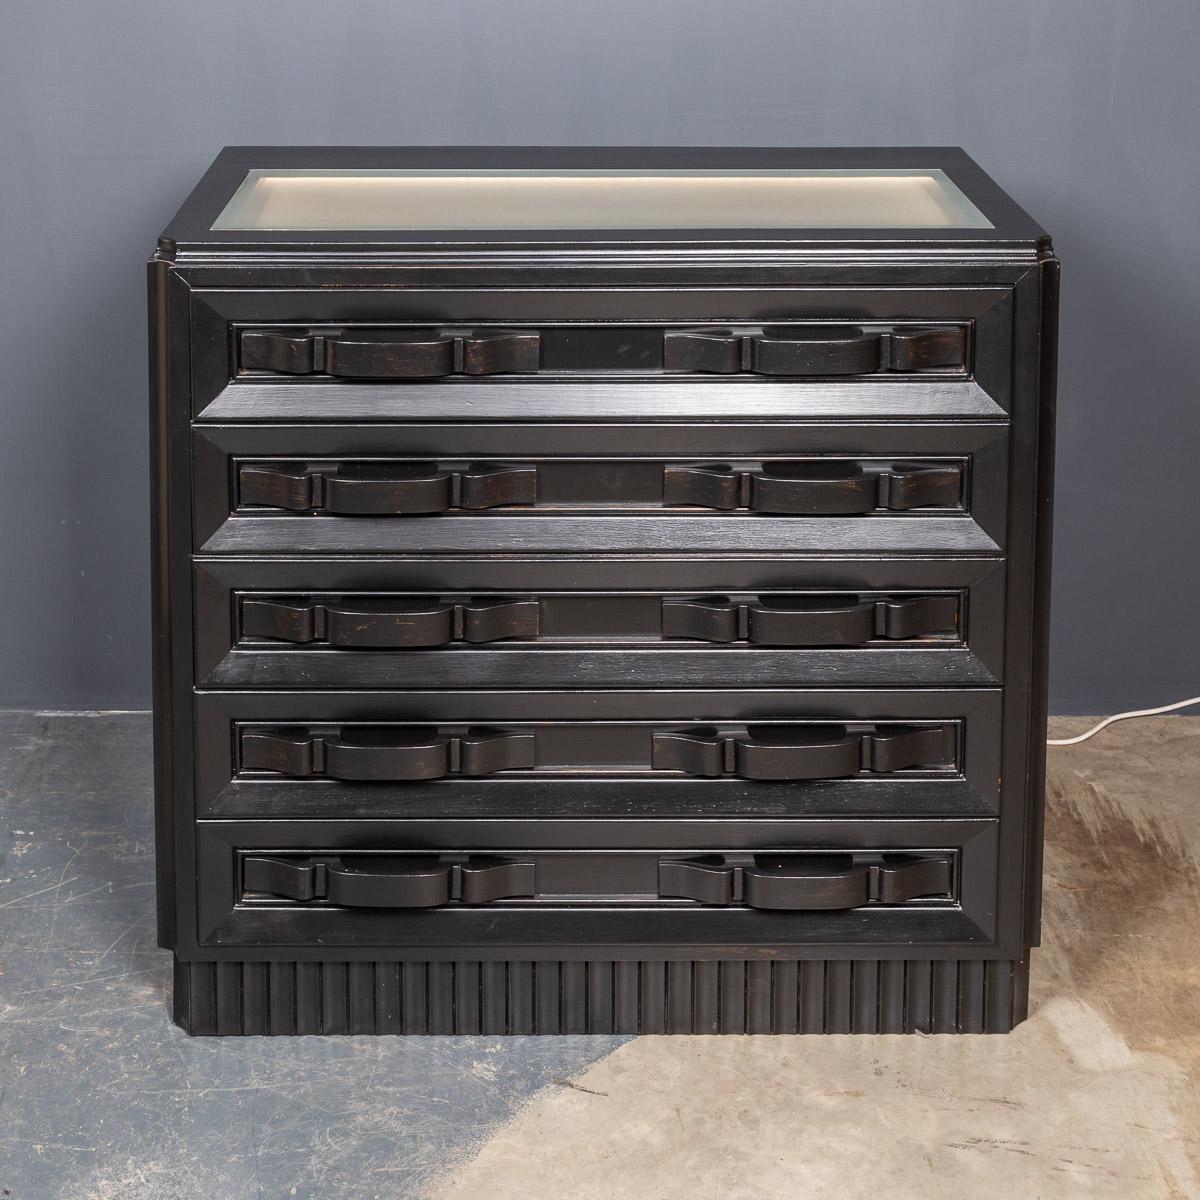 Striking 20th century Italian ebonised chest of four pull-out drawers with a lit up vitrine display top and carved buckle shaped handles and panelled sides.

Measures: Width 100cm
Height 96cm
Depth 55cm.